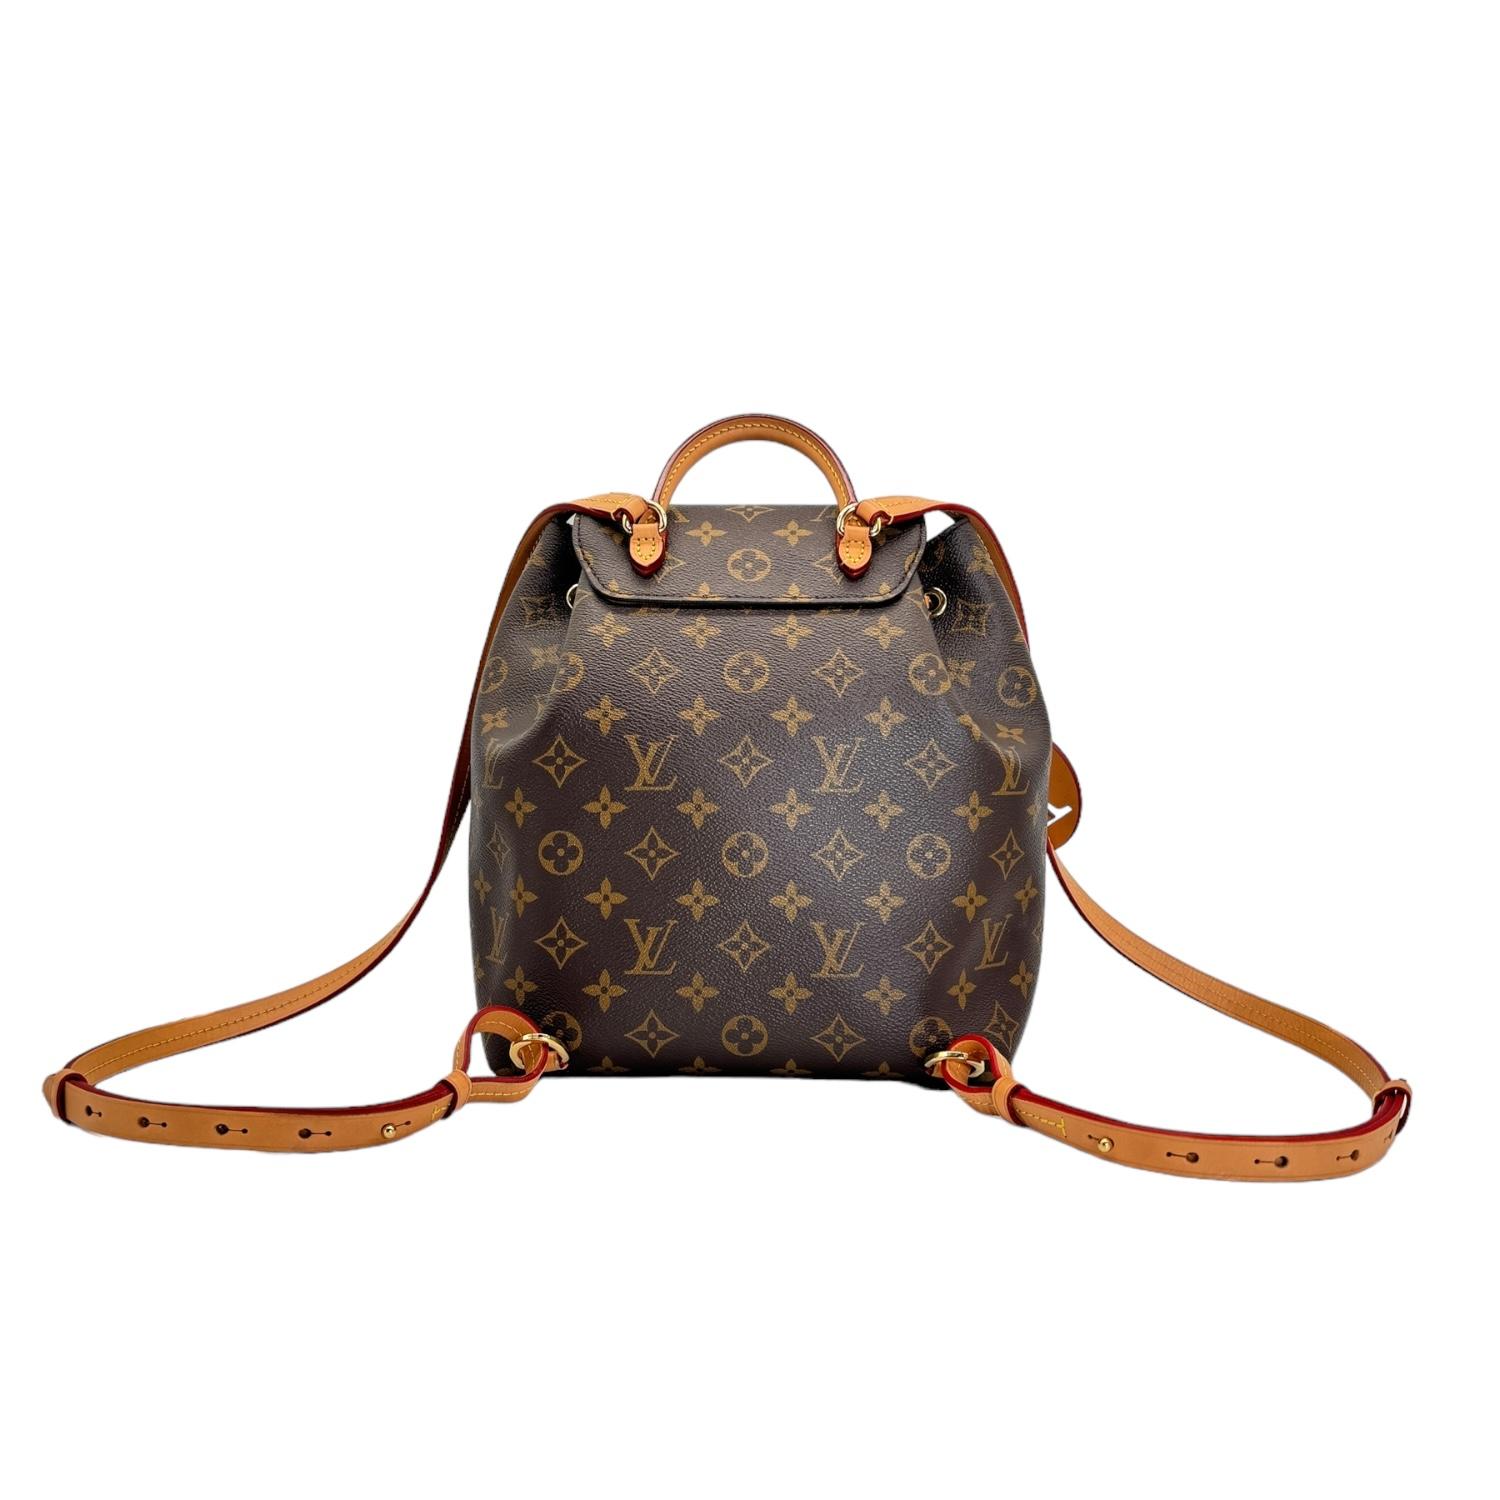 This stylish backpack is crafted of classic Louis Vuitton monogram on coated canvas in brown. It features vachetta leather trim, rolled vachetta handle, vachetta adjustable shoulder straps, and polished brass hardware. The front flap opens with a